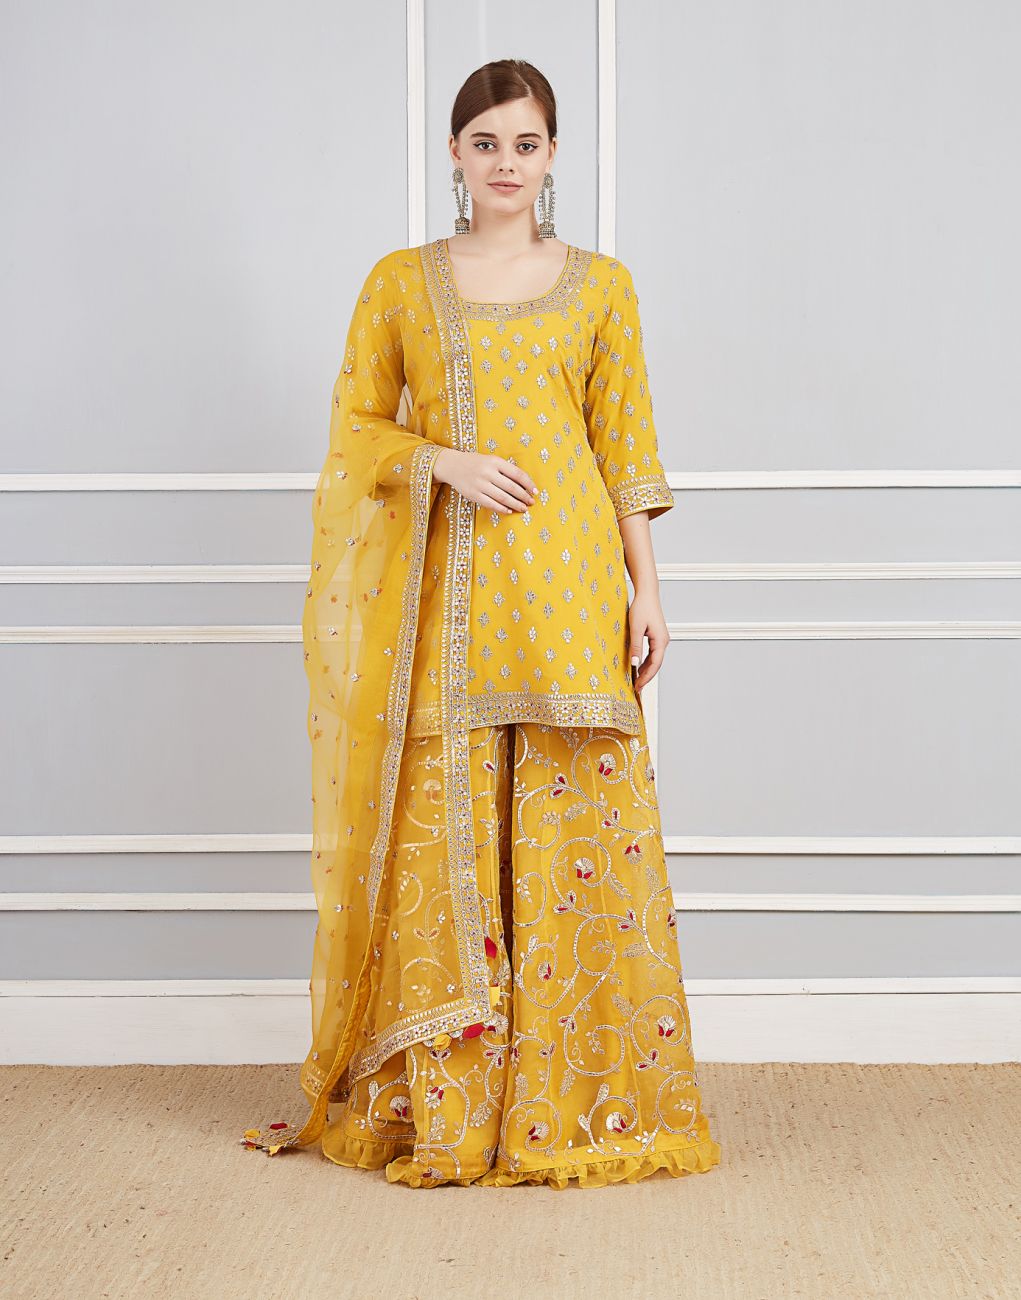 Yellow Organza Sharara Set Indian Clothing in Denver, CO, Aurora, CO, Boulder, CO, Fort Collins, CO, Colorado Springs, CO, Parker, CO, Highlands Ranch, CO, Cherry Creek, CO, Centennial, CO, and Longmont, CO. NATIONWIDE SHIPPING USA- India Fashion X